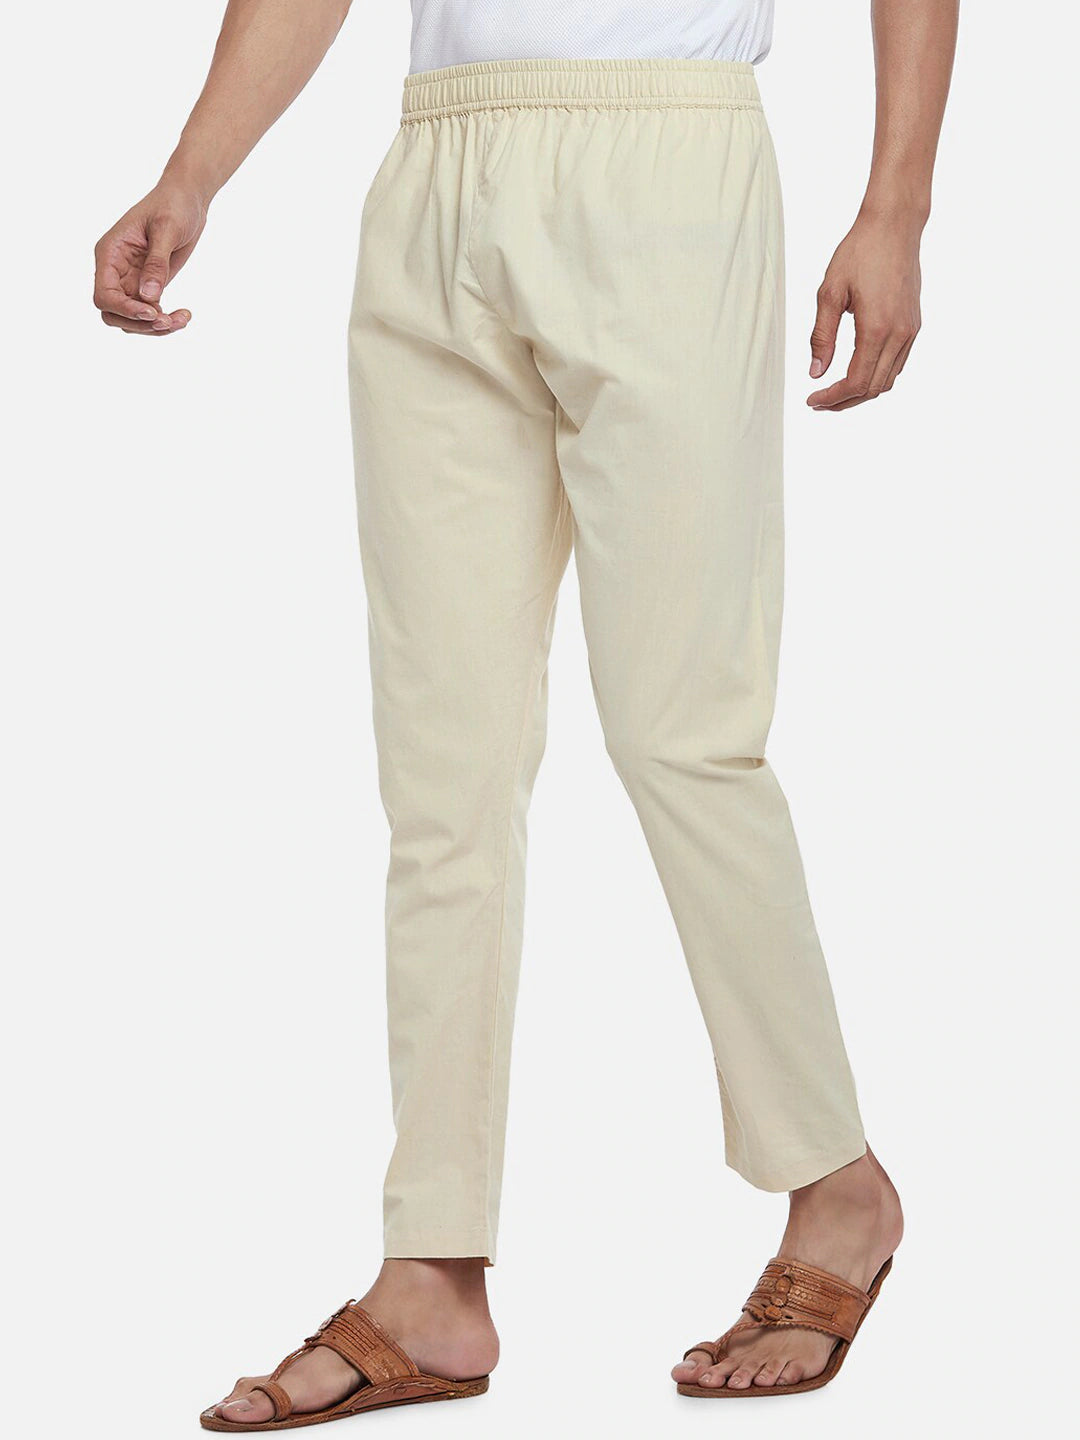 Slim Beige Churidar Pants Indian Clothing in Denver, CO, Aurora, CO, Boulder, CO, Fort Collins, CO, Colorado Springs, CO, Parker, CO, Highlands Ranch, CO, Cherry Creek, CO, Centennial, CO, and Longmont, CO. NATIONWIDE SHIPPING USA- India Fashion X